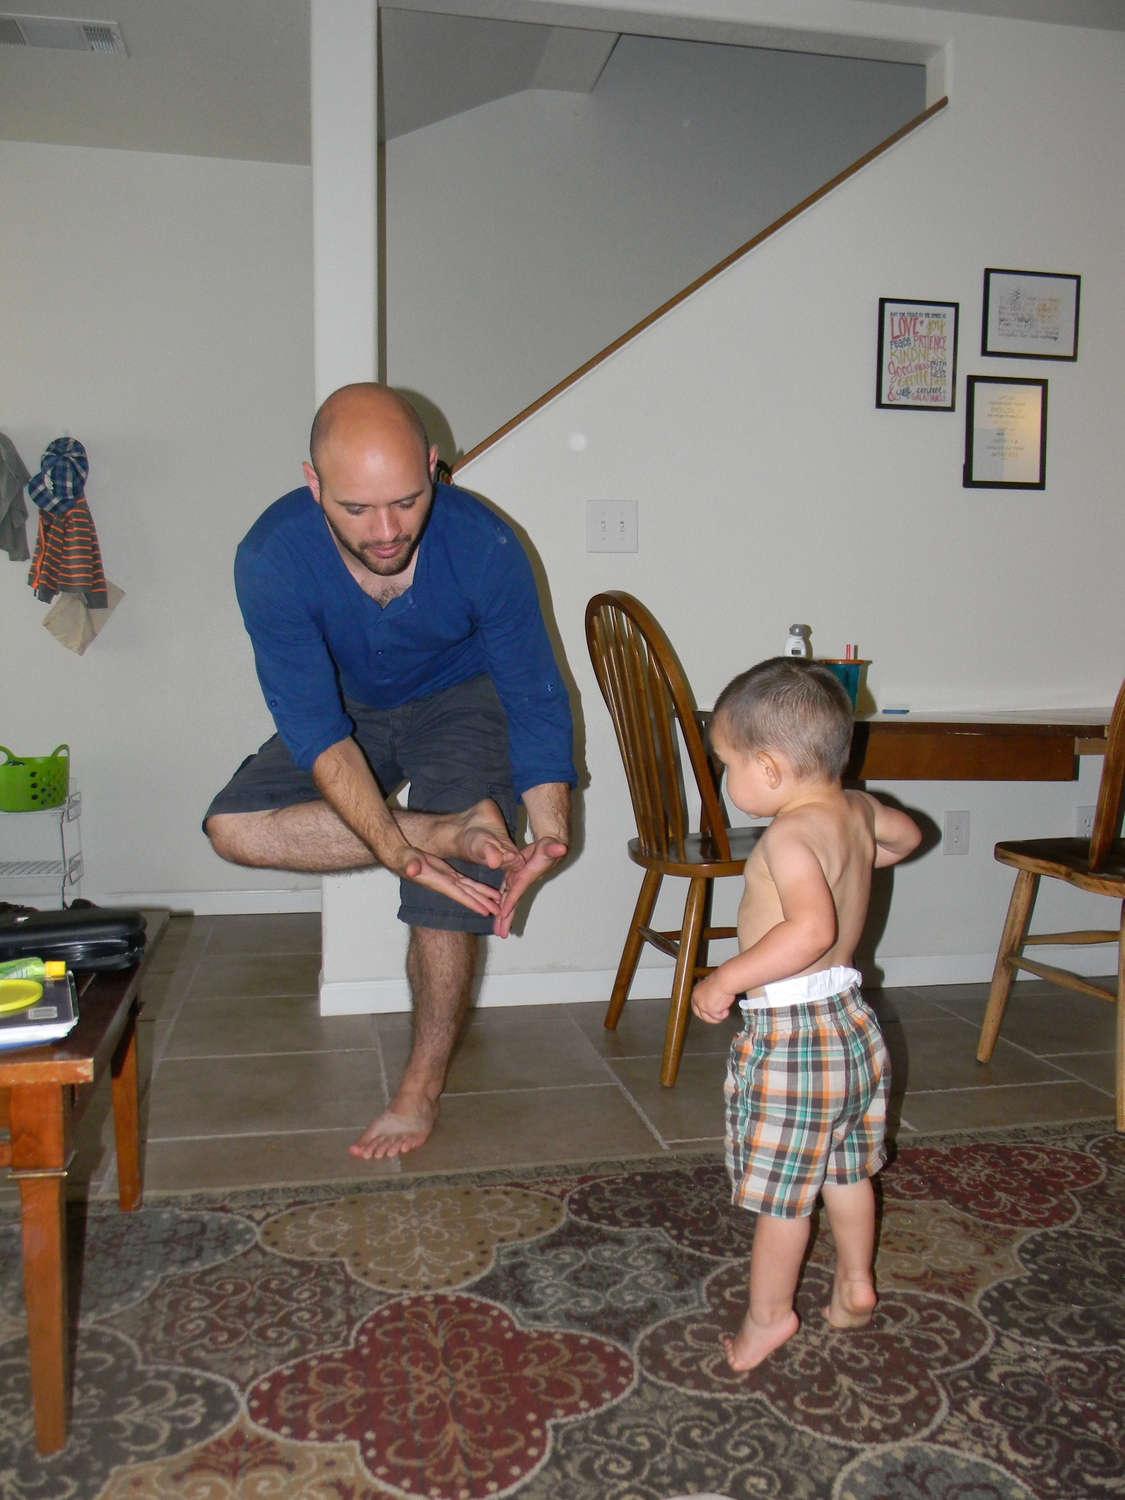 Father&son pic #3: Not sure what those two are doing here but they had fun!